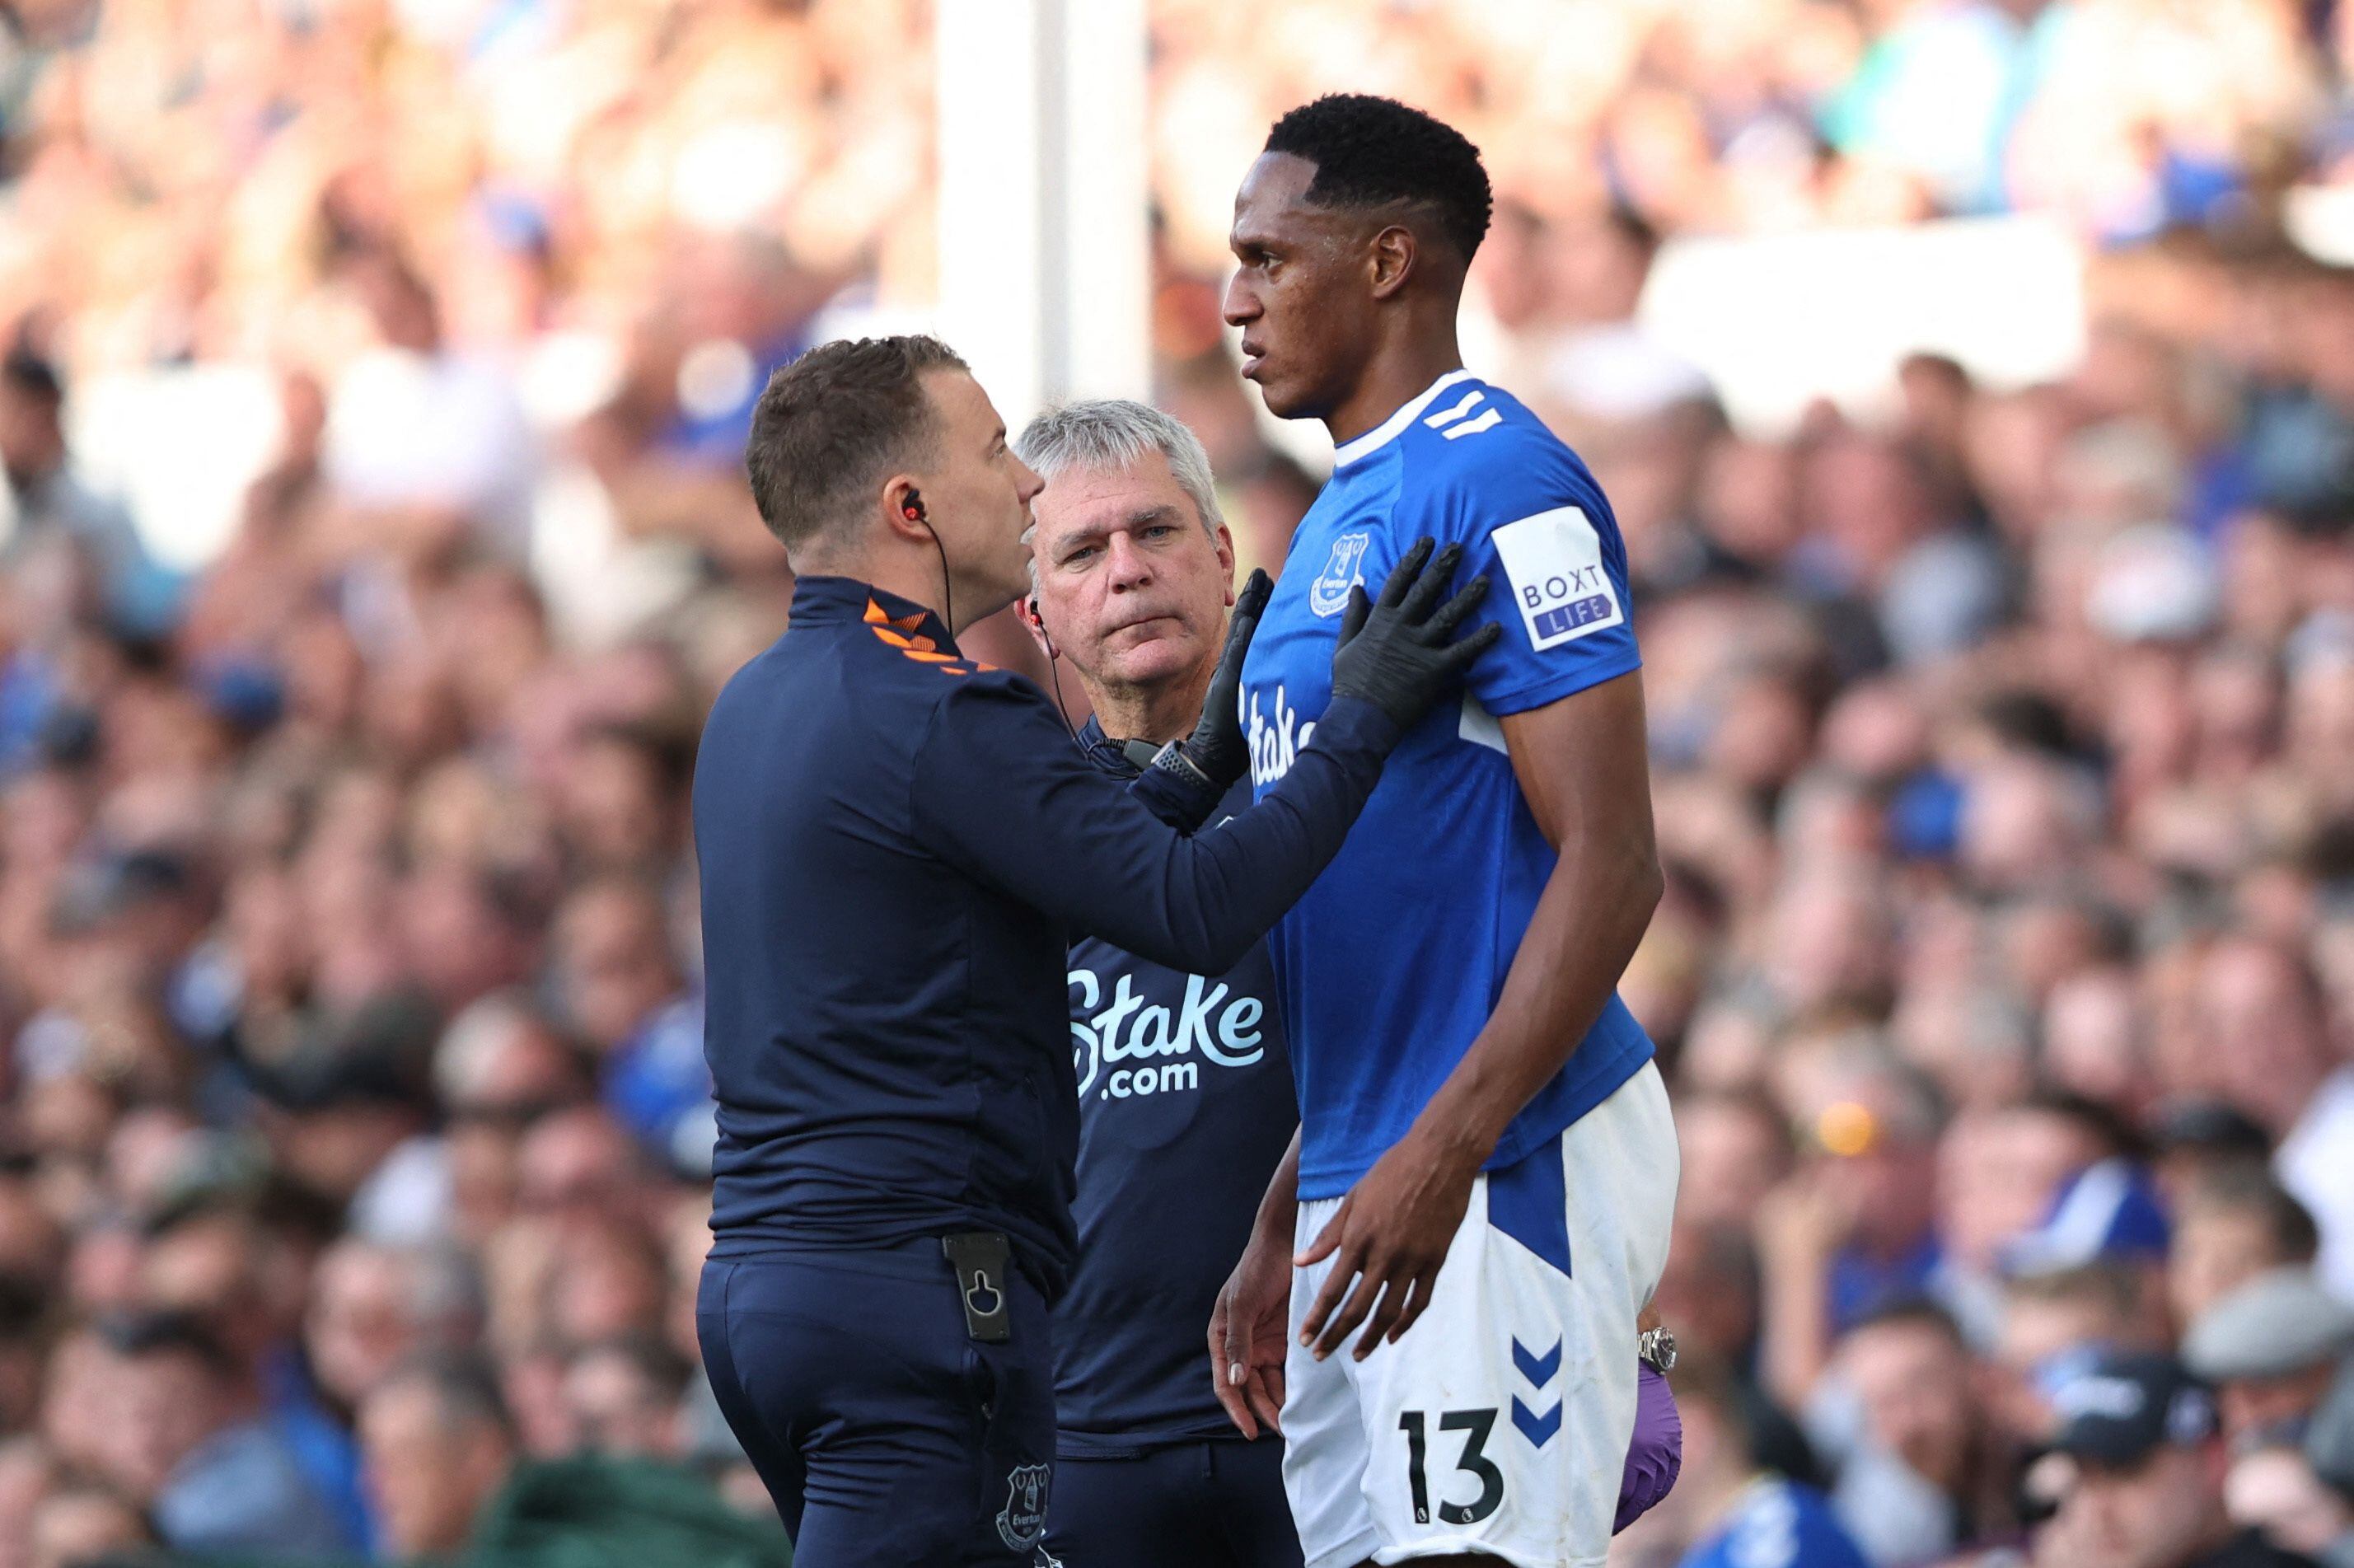 Yerry Mina será baja por lesión durante ocho semana en el Everton de Inglaterra Soccer Football - Premier League - Everton v Chelsea - Goodison Park, Liverpool, Britain - August 6, 2022 Everton's Yerry Mina receives medical attention after sustaining an injury Action Images via Reuters/Molly Darlington EDITORIAL USE ONLY. No use with unauthorized audio, video, data, fixture lists, club/league logos or 'live' services. Online in-match use limited to 75 images, no video emulation. No use in betting, games or single club /league/player publications.  Please contact your account representative for further details.